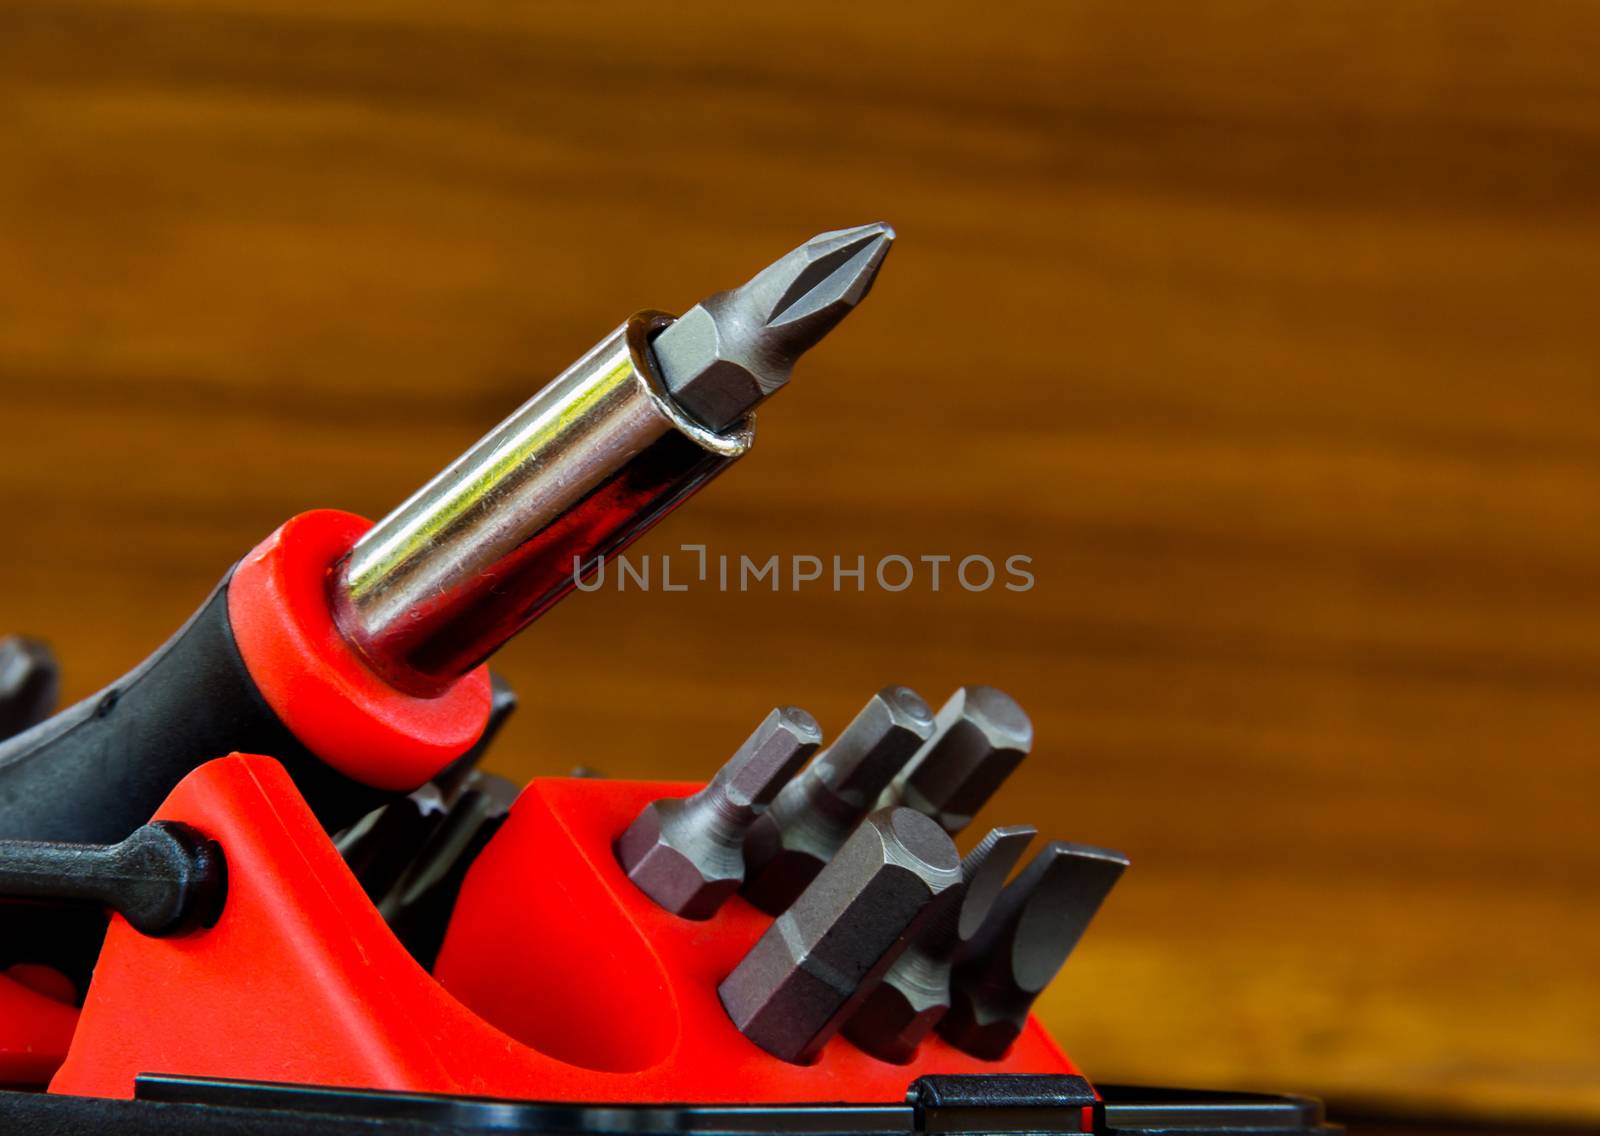 Screwdriver set  is equipment for technicians.Focus Screwdriver in the  image. Select focus